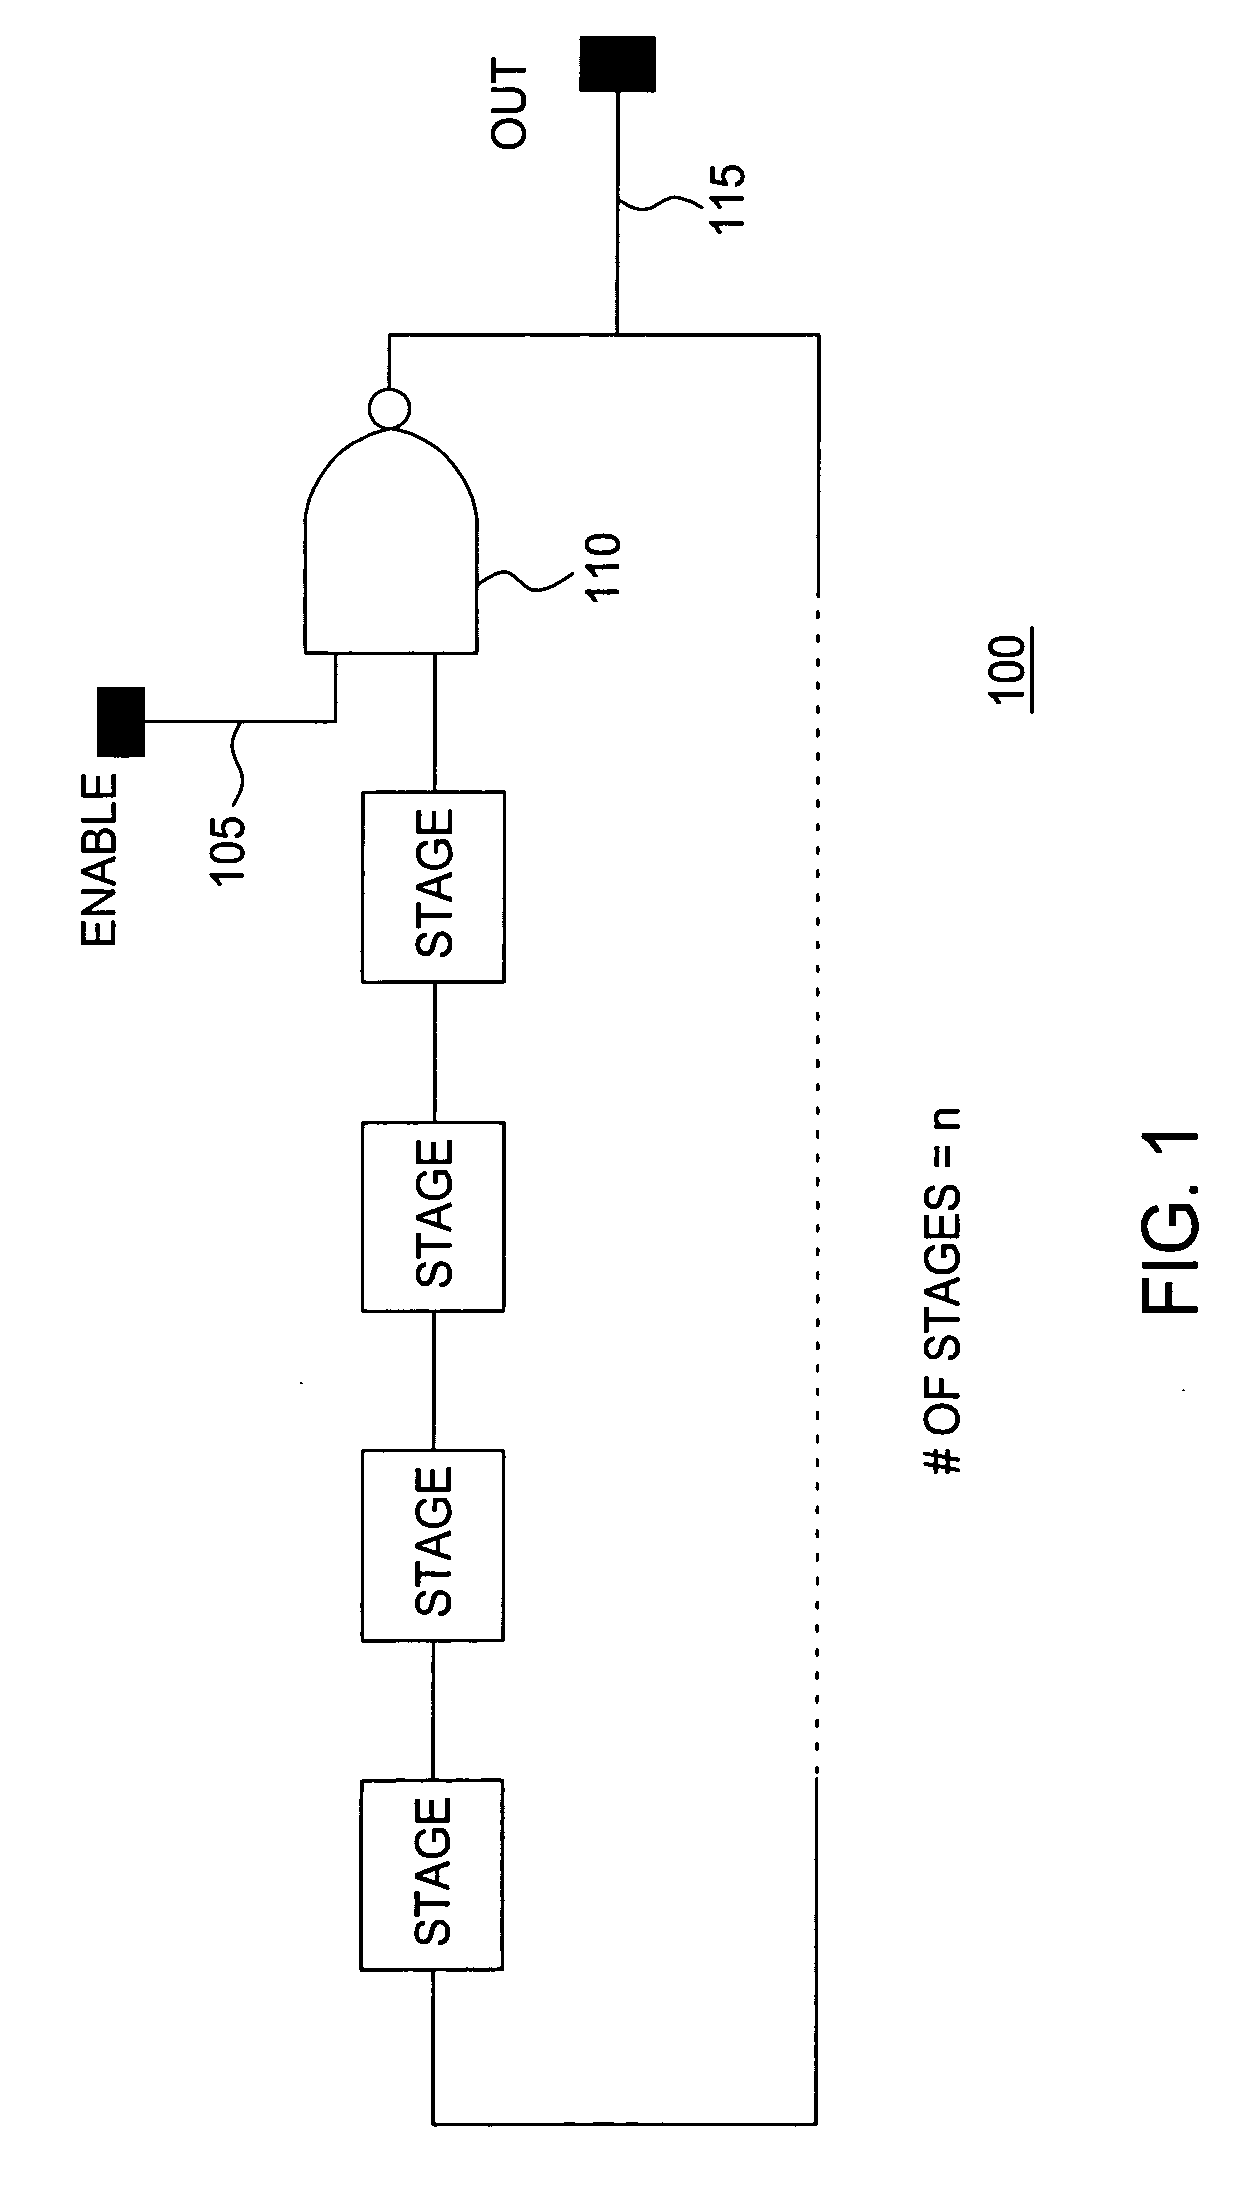 Method and apparatus for rapid inline measurement of parameter spreads and defects in integrated circuit chips